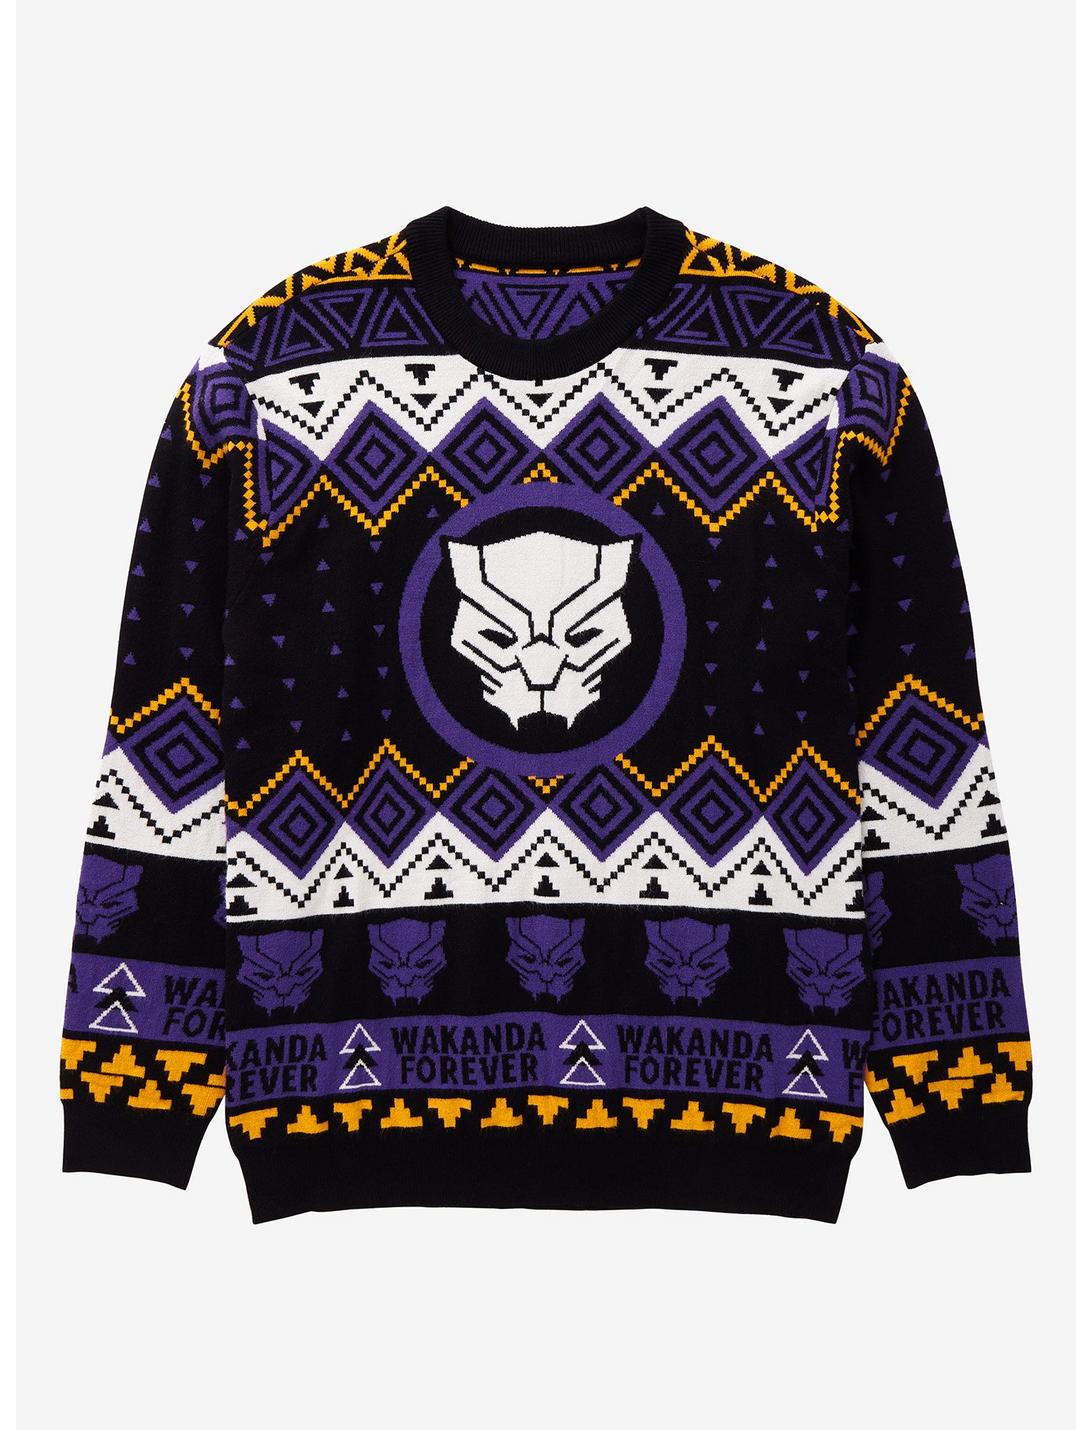 Our Universe Marvel Black Panther Wakanda Forever Holiday Sweater, MULTI, hi-res